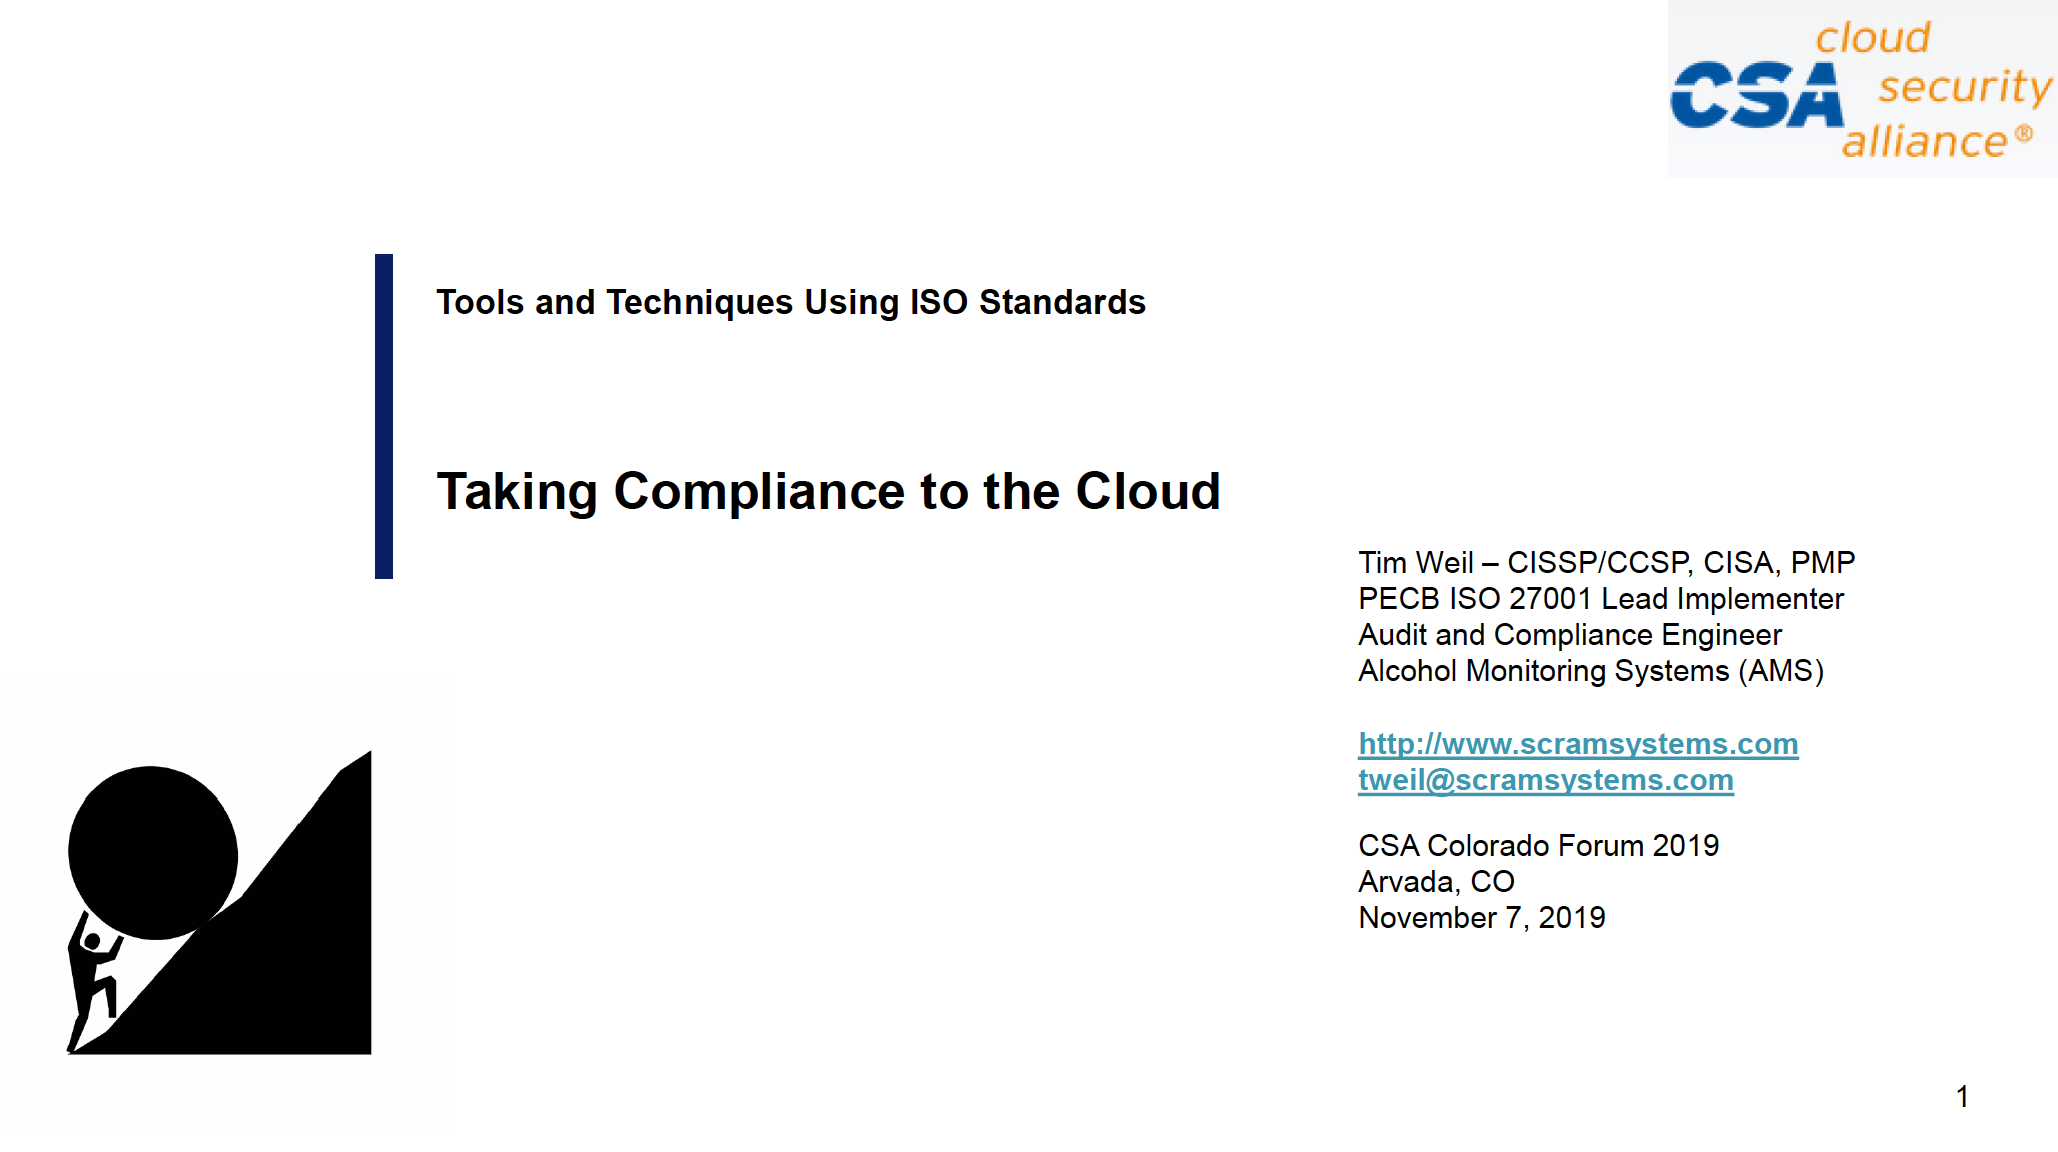 Taking Compliance to the Cloud- Tim Weil